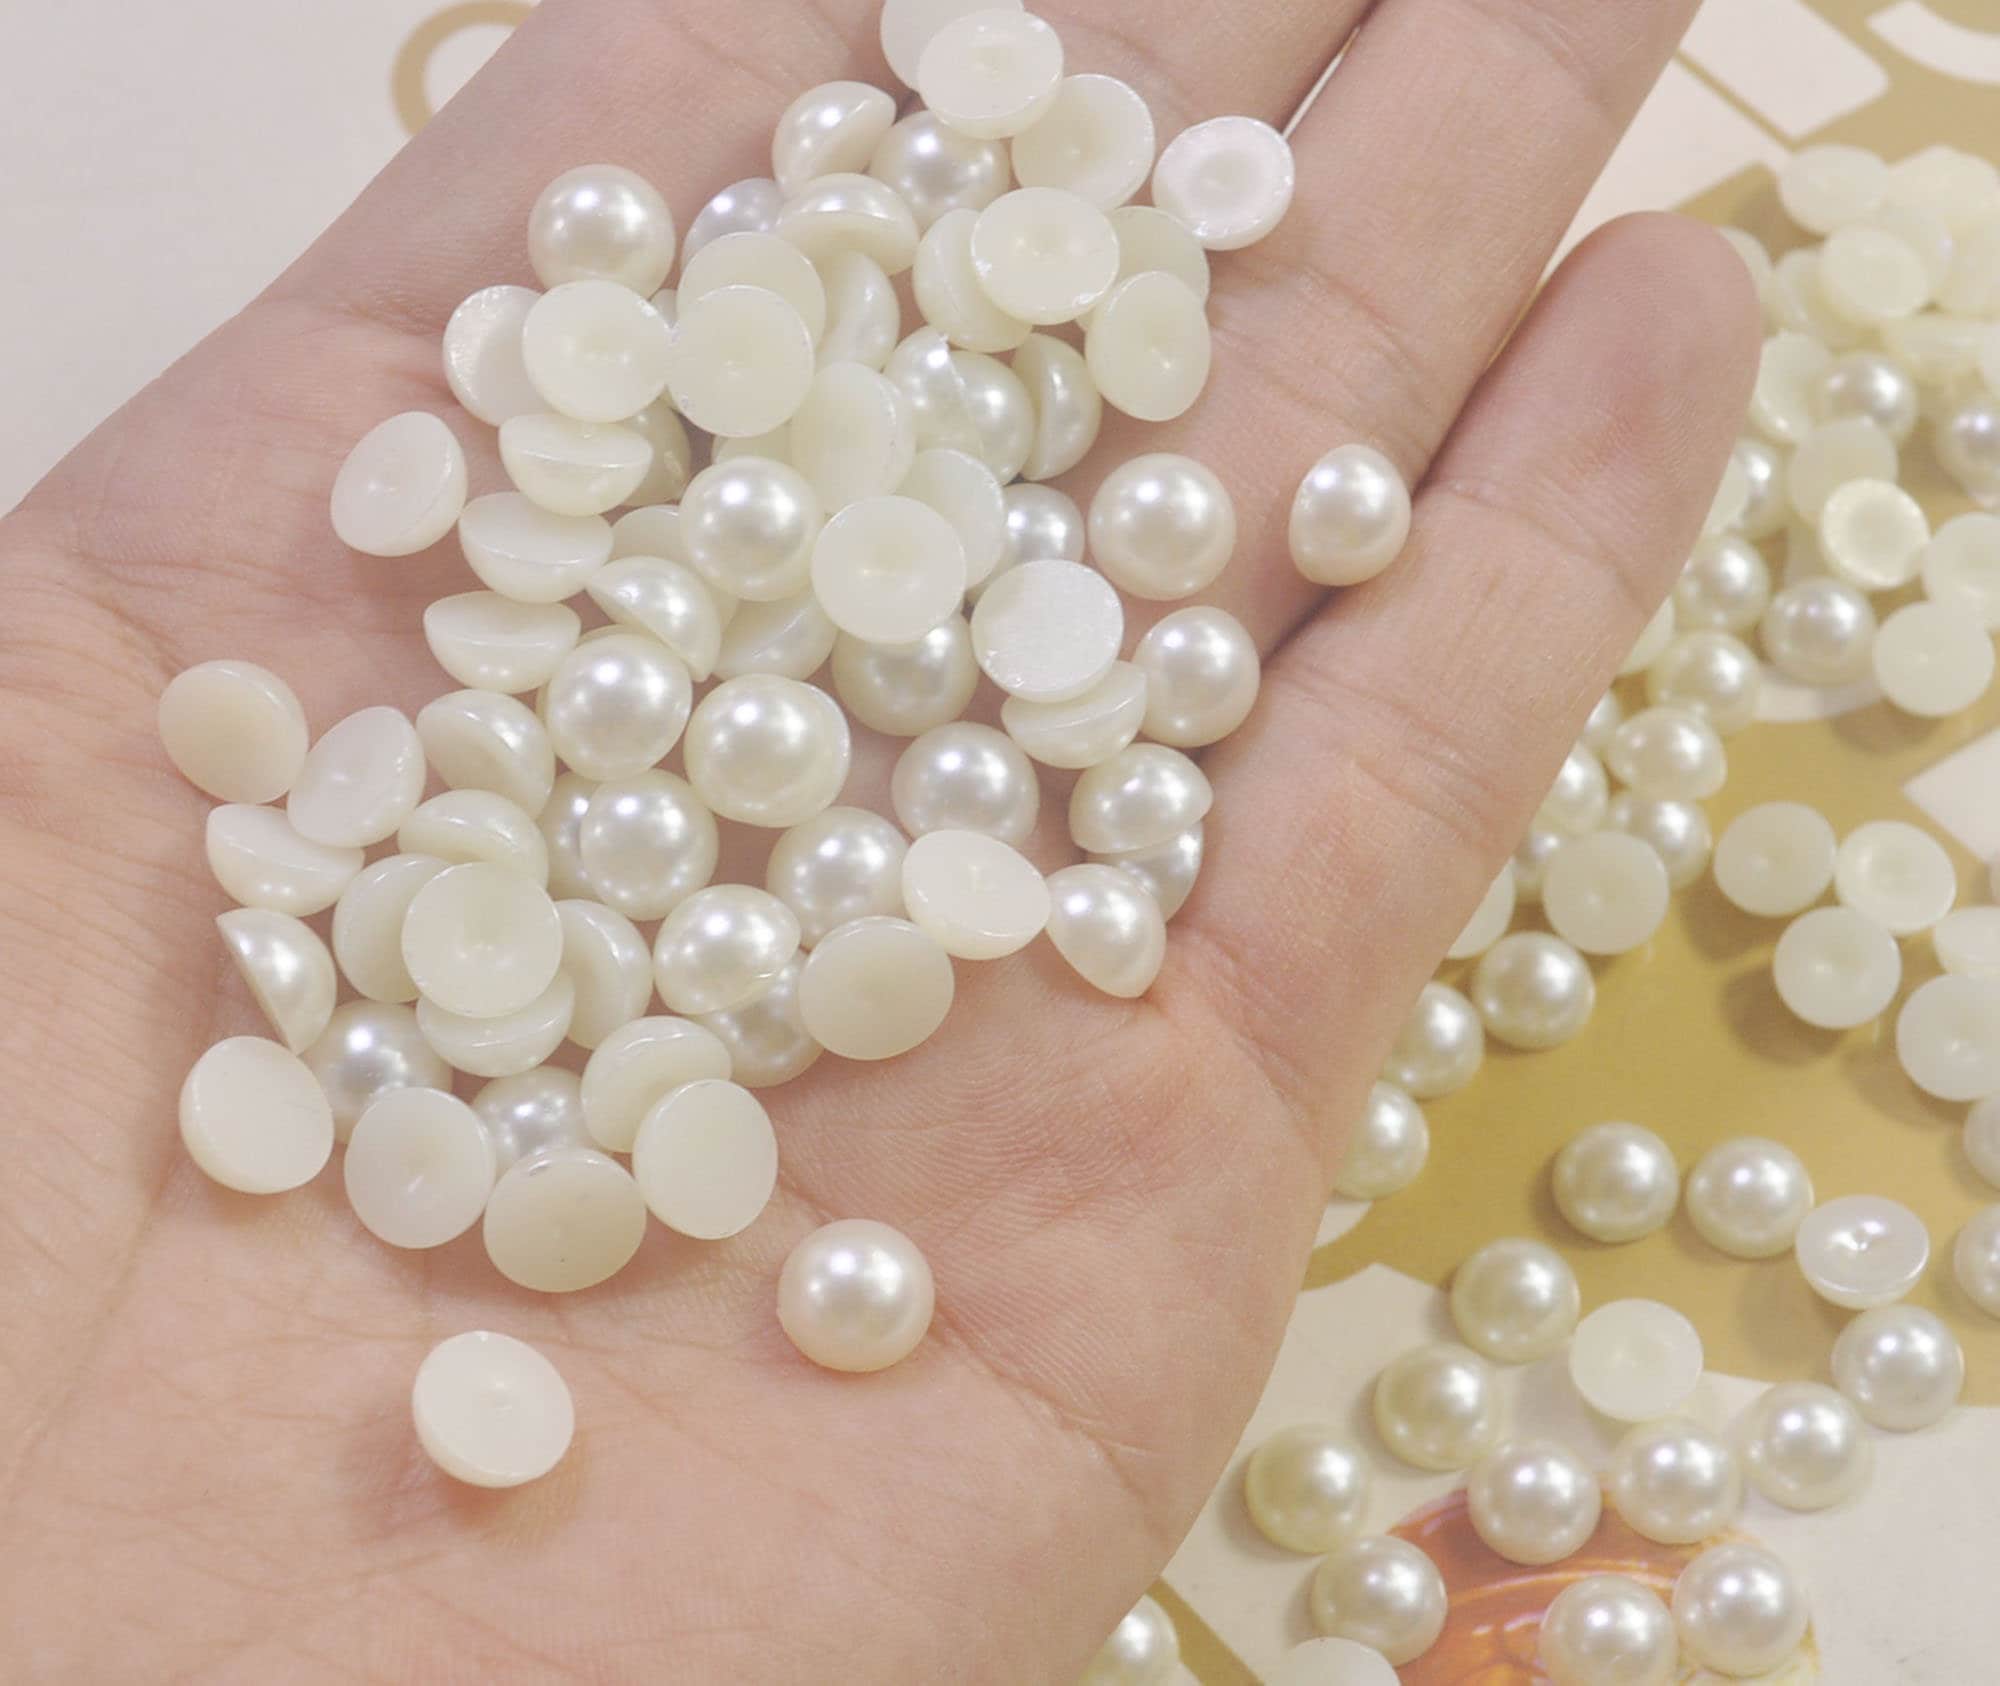 Micui 6/8/10/12mm White Round Pearl Beads ABS Resin Half Pearls Flatback  Bead For Jewelry Making Scrapbook Beads DIY MC248